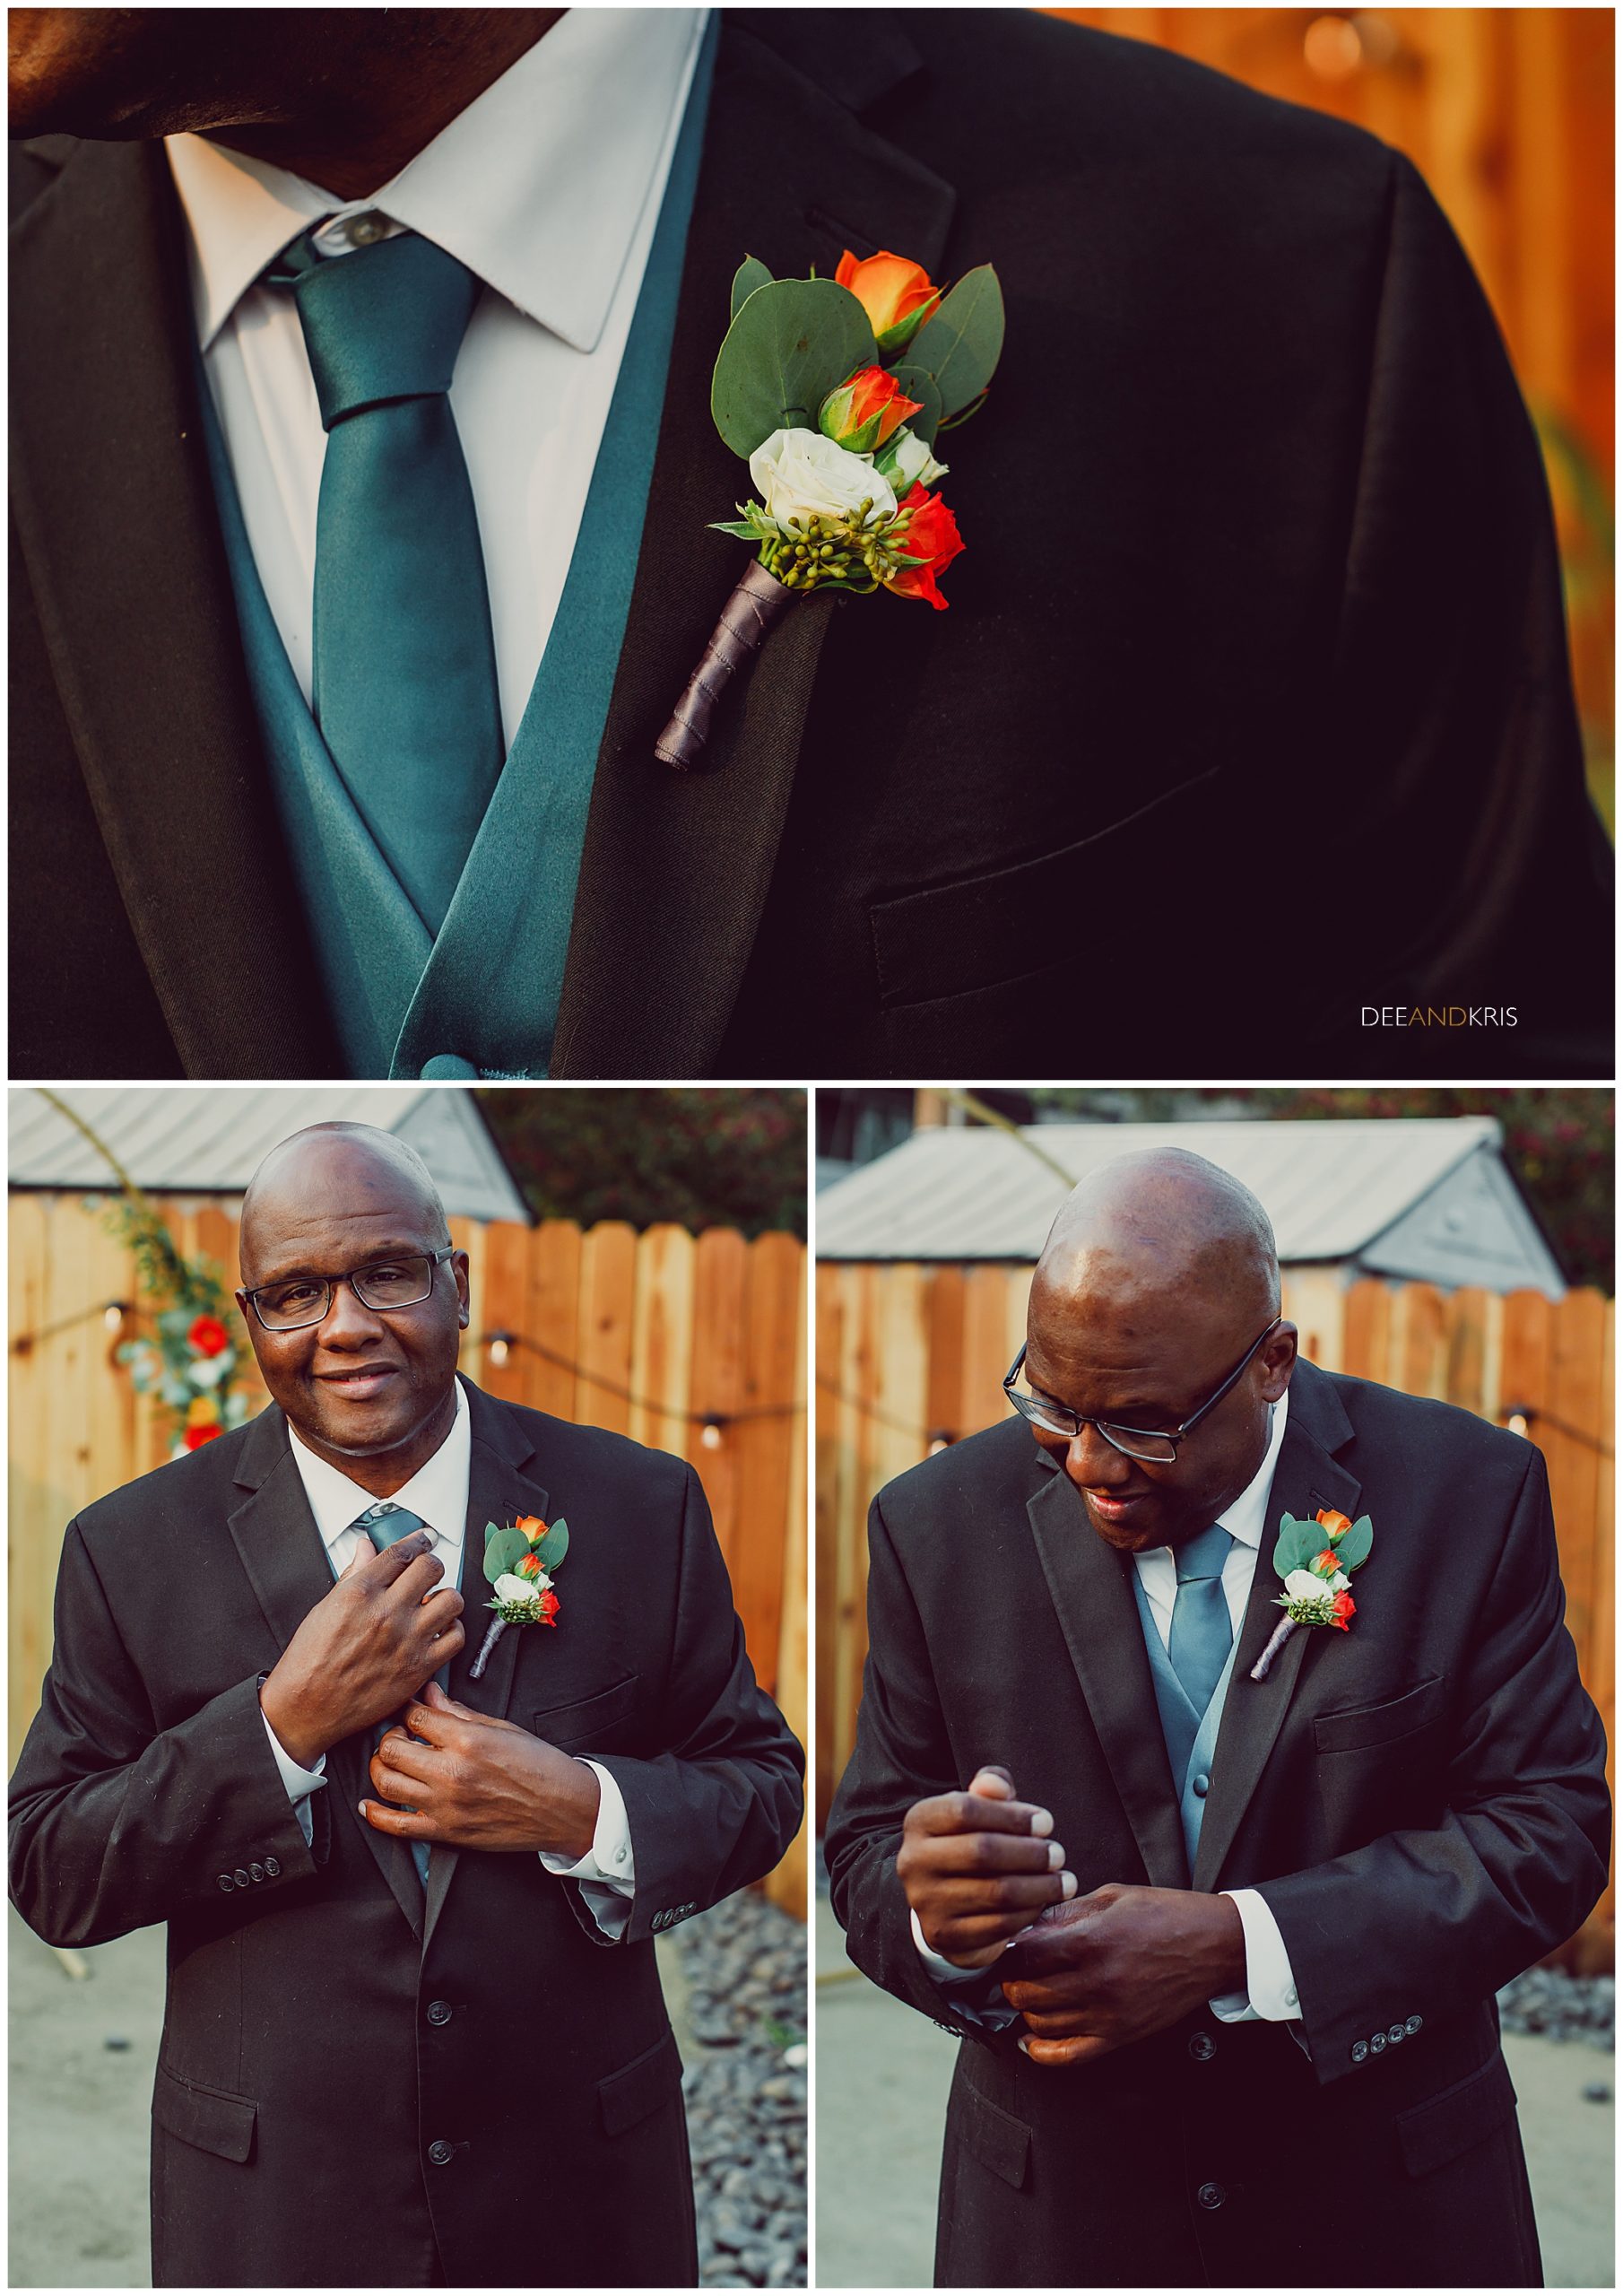 Groom gets ready for his wedding day with teal colored tie and orange floral boutonnière 